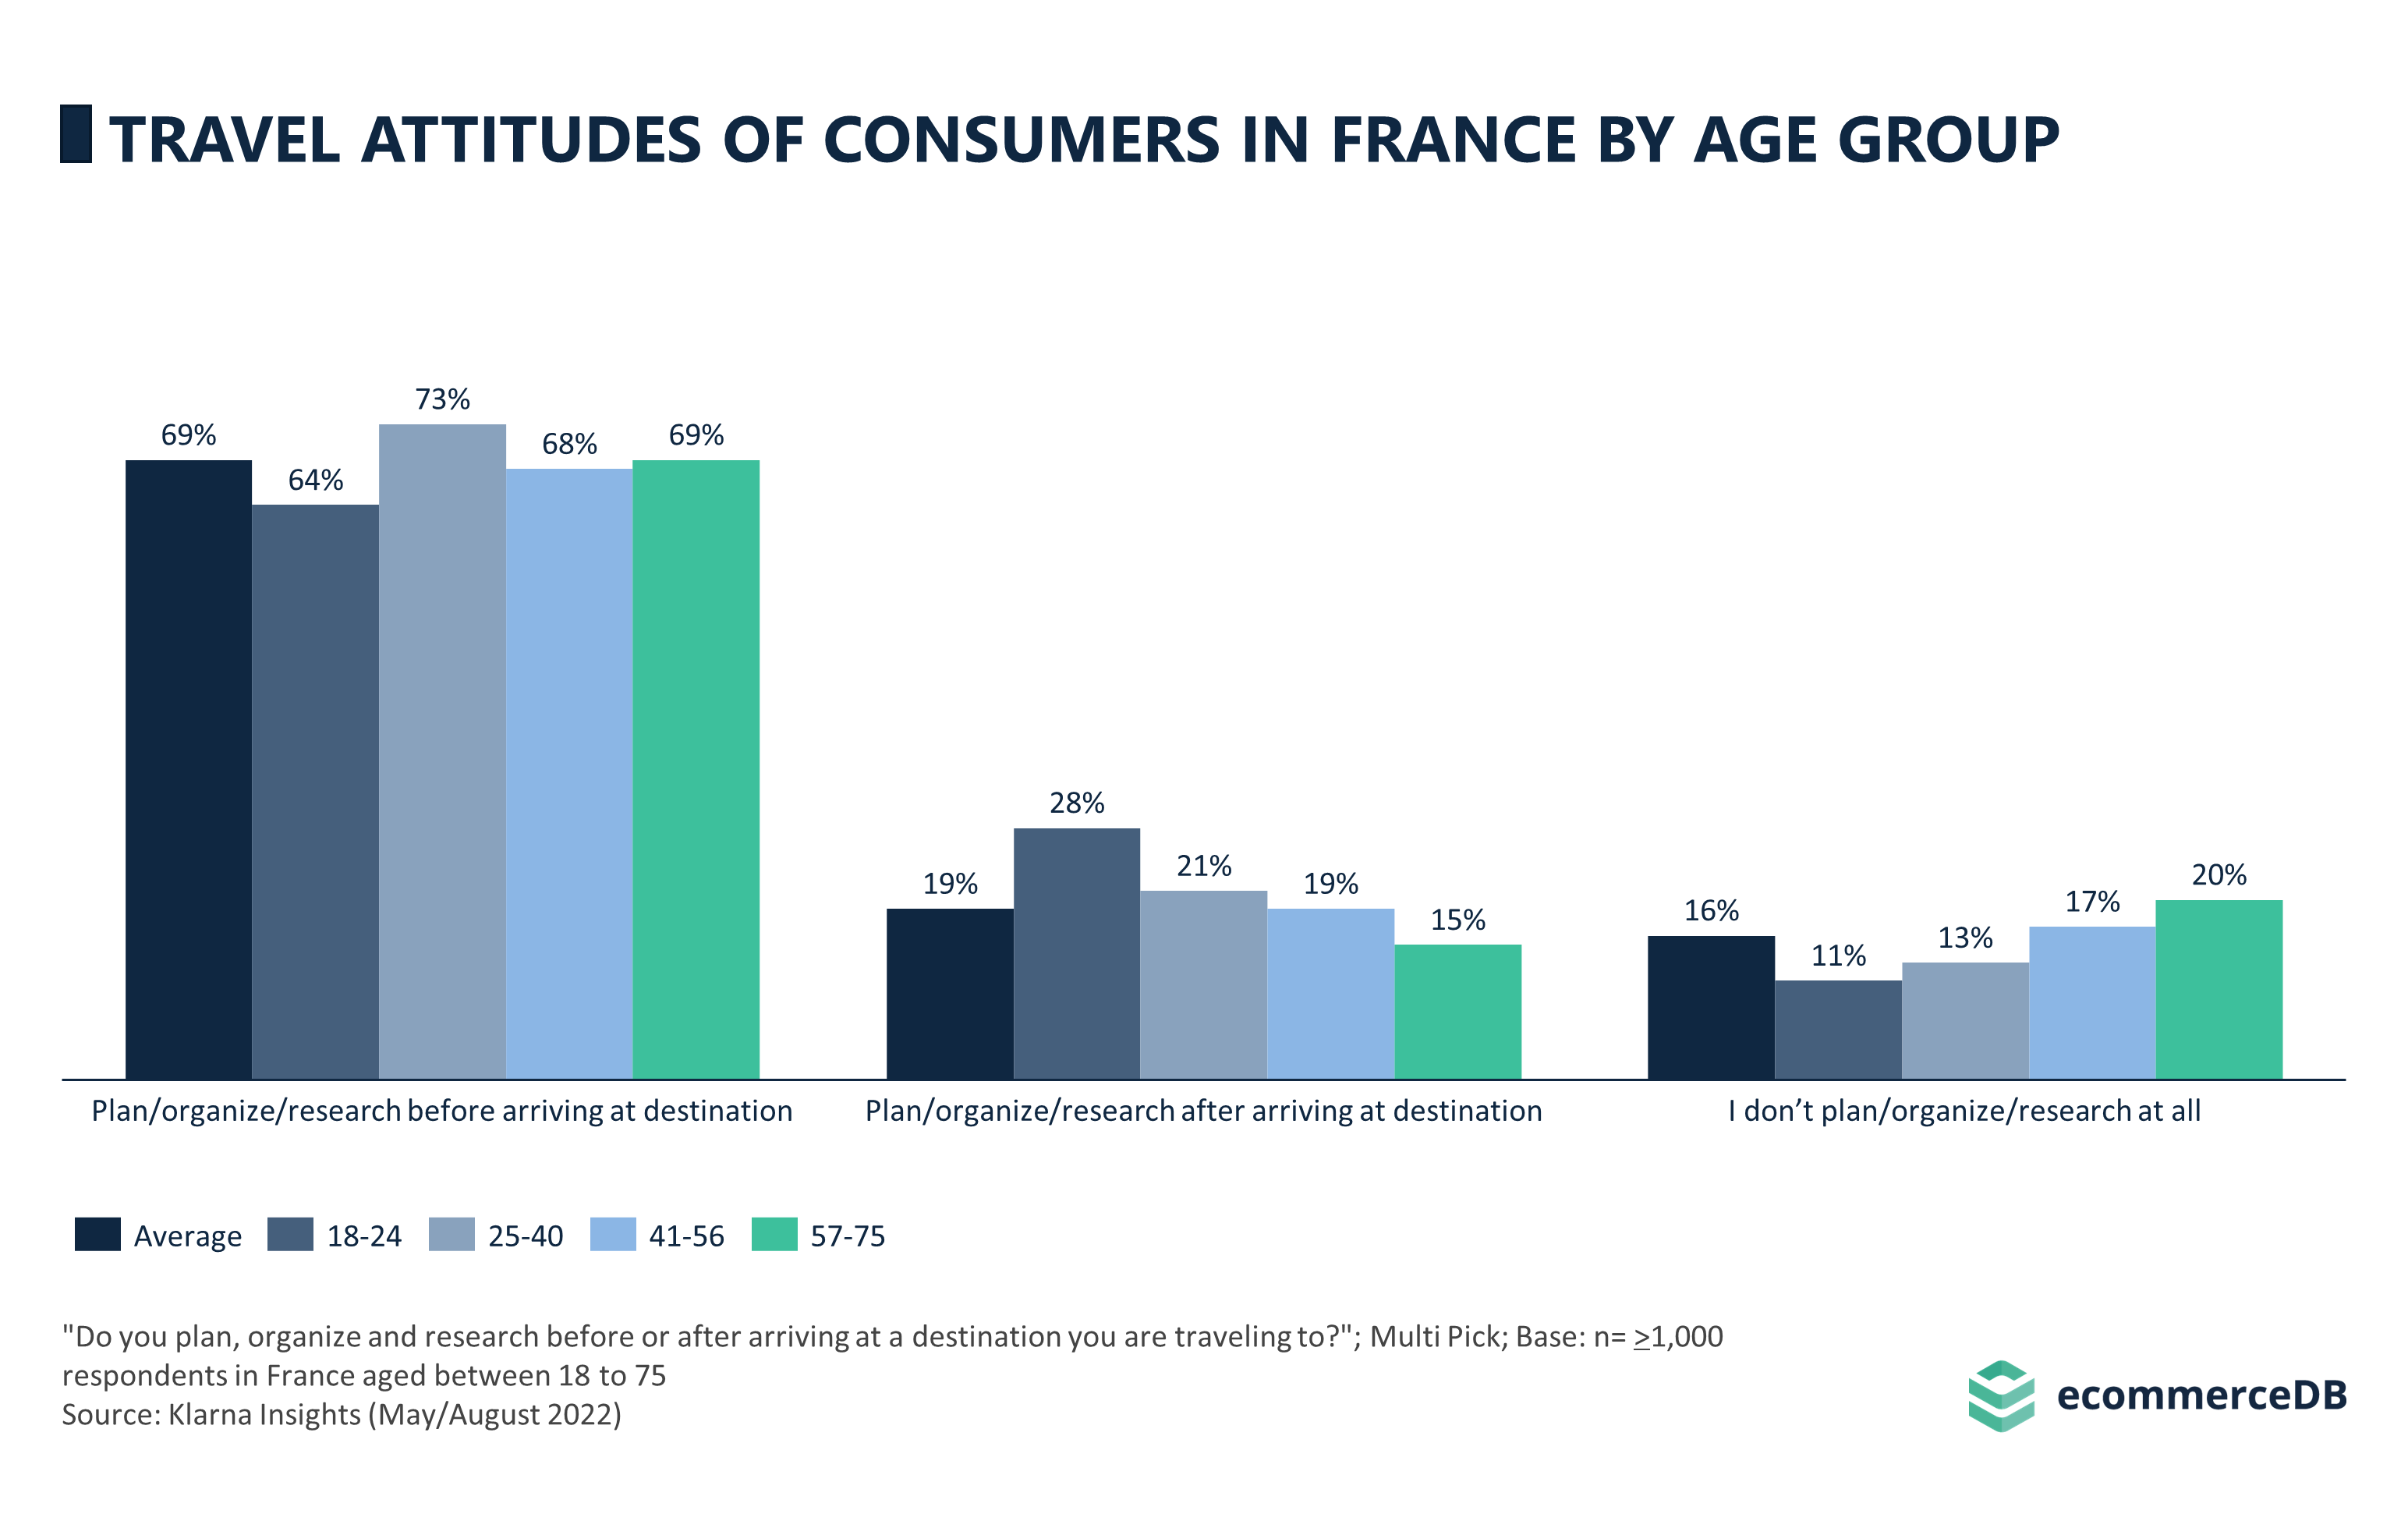 Travel Attitudes of Consumers in France by Age Group